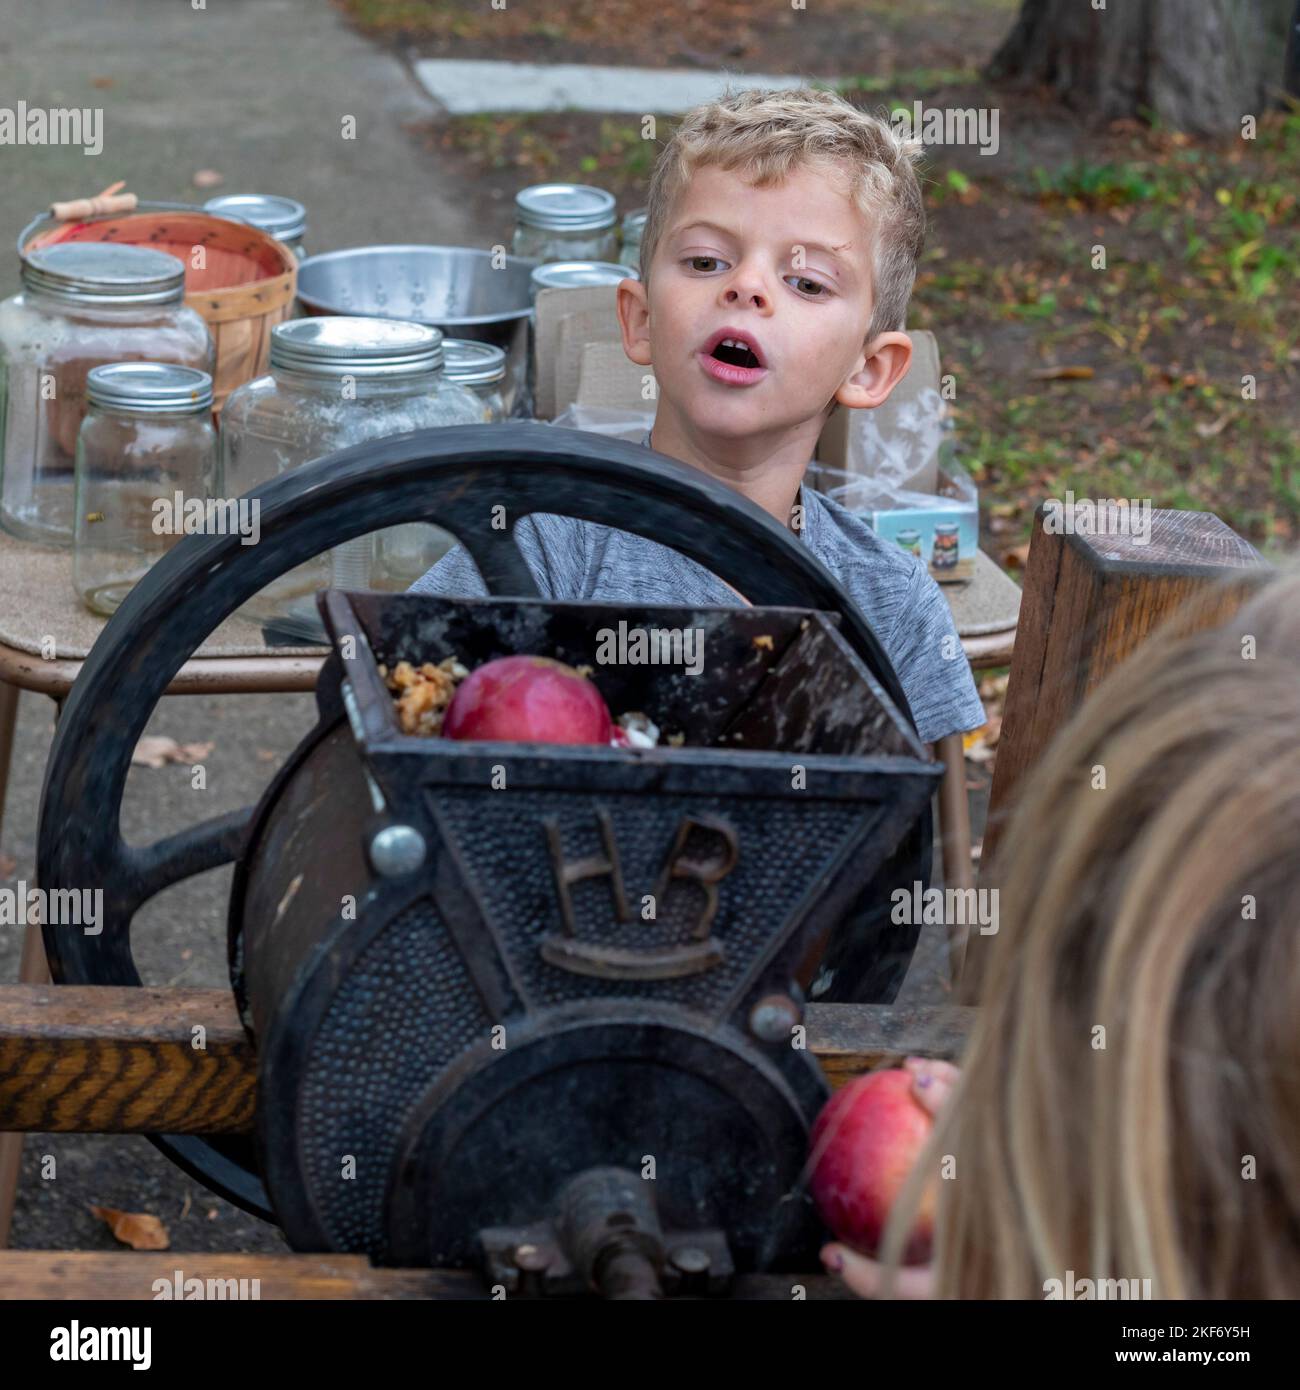 Detroit, Michigan - Children make apple cider with an apple press at a fall festival on the near east side of Detroit. Stock Photo